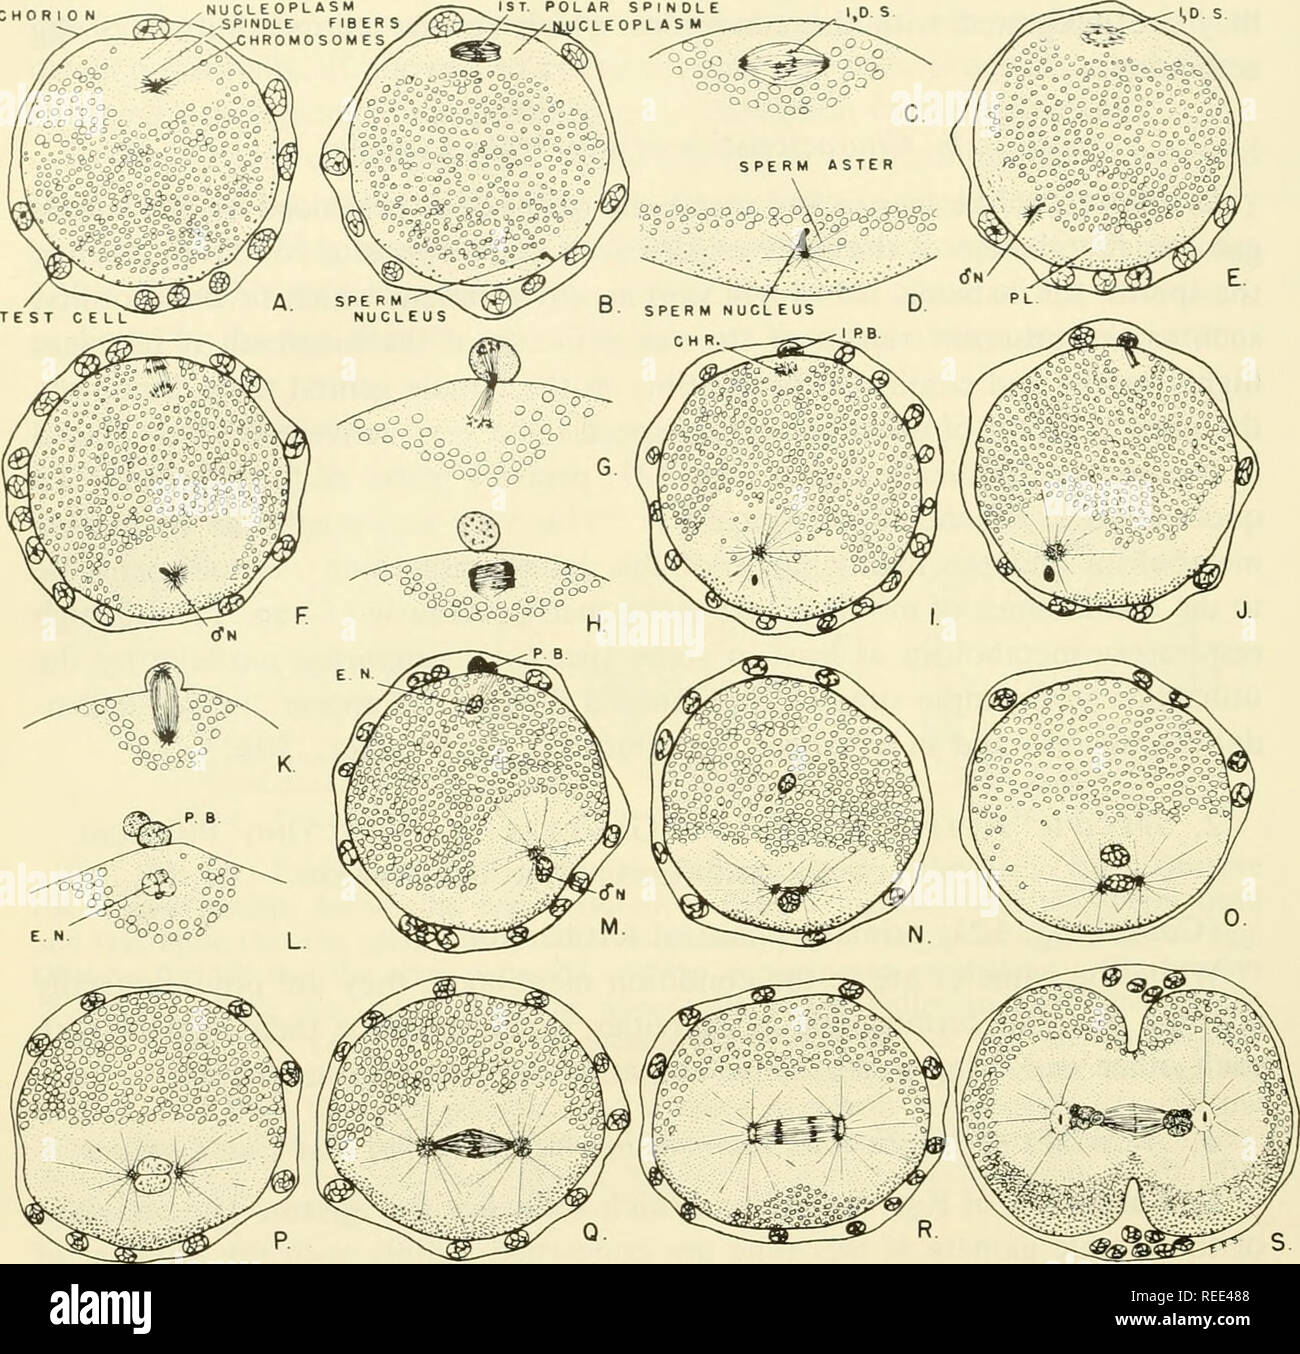 . Comparative embryology of the vertebrates; with 2057 drawings and photos. grouped as 380 illus. Vertebrates -- Embryology; Comparative embryology. CHORION. Fig. 116. Fertilization and maturation of the egg in the urochordate, Styela (Cynthia) partita. (After Conklin, '05.) (A) Egg shortly after spawning but before sperm entrance. The spindle fibers of the first maturation division are forming, and the nucleoplasm is located toward the animal pole. (B) Egg showing the spindle for first maturation divi- sion. Observe the sperm nucleus just inside the ooplasmic membrane near the midvegetal pole Stock Photo